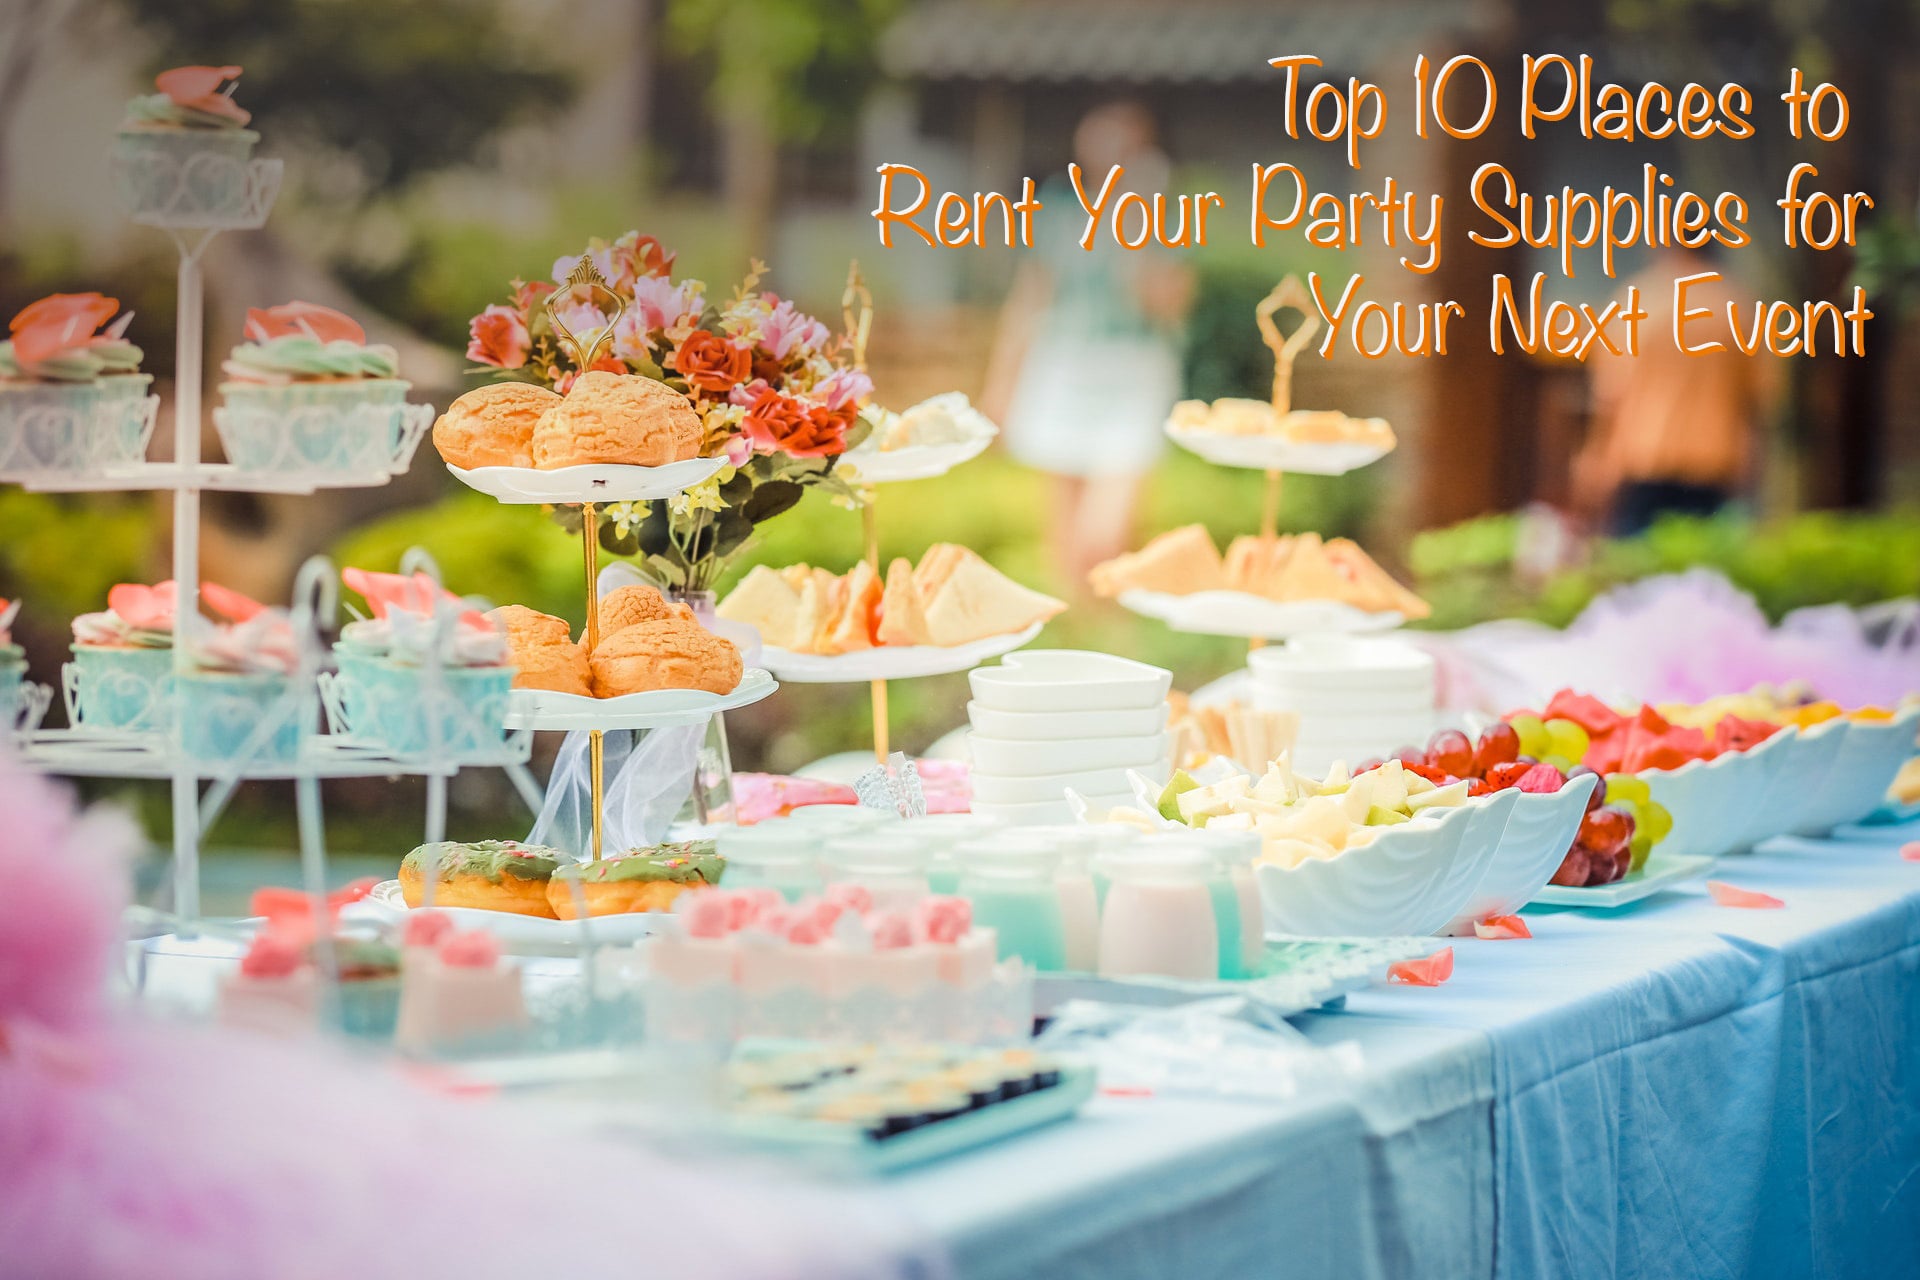 Top 10 Places to Rent Your Party Supplies for Your Next Event